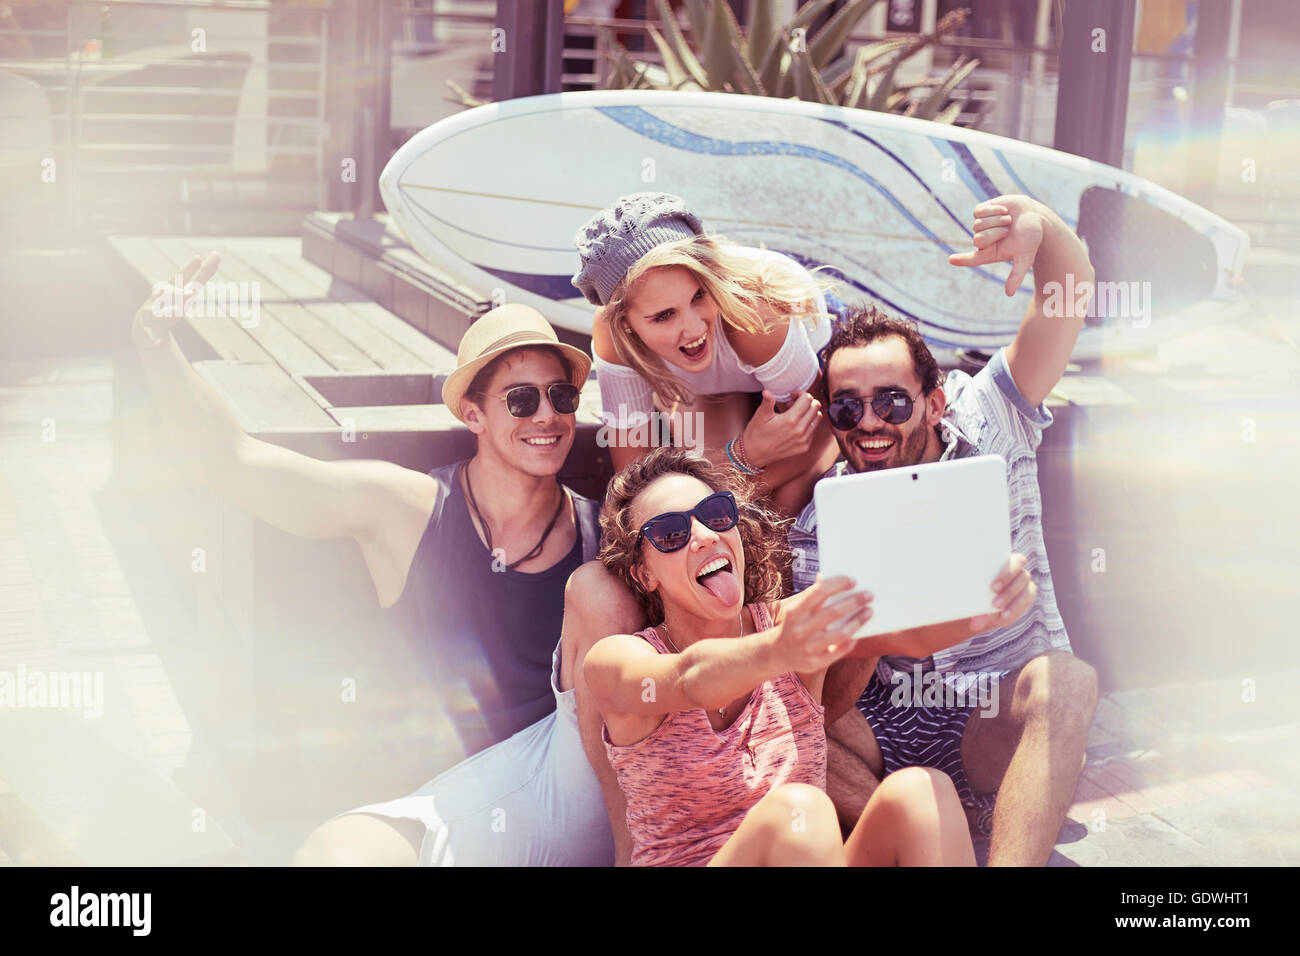 Playful young friends taking selfie in front of surfboard with digital tablet Stock Photo